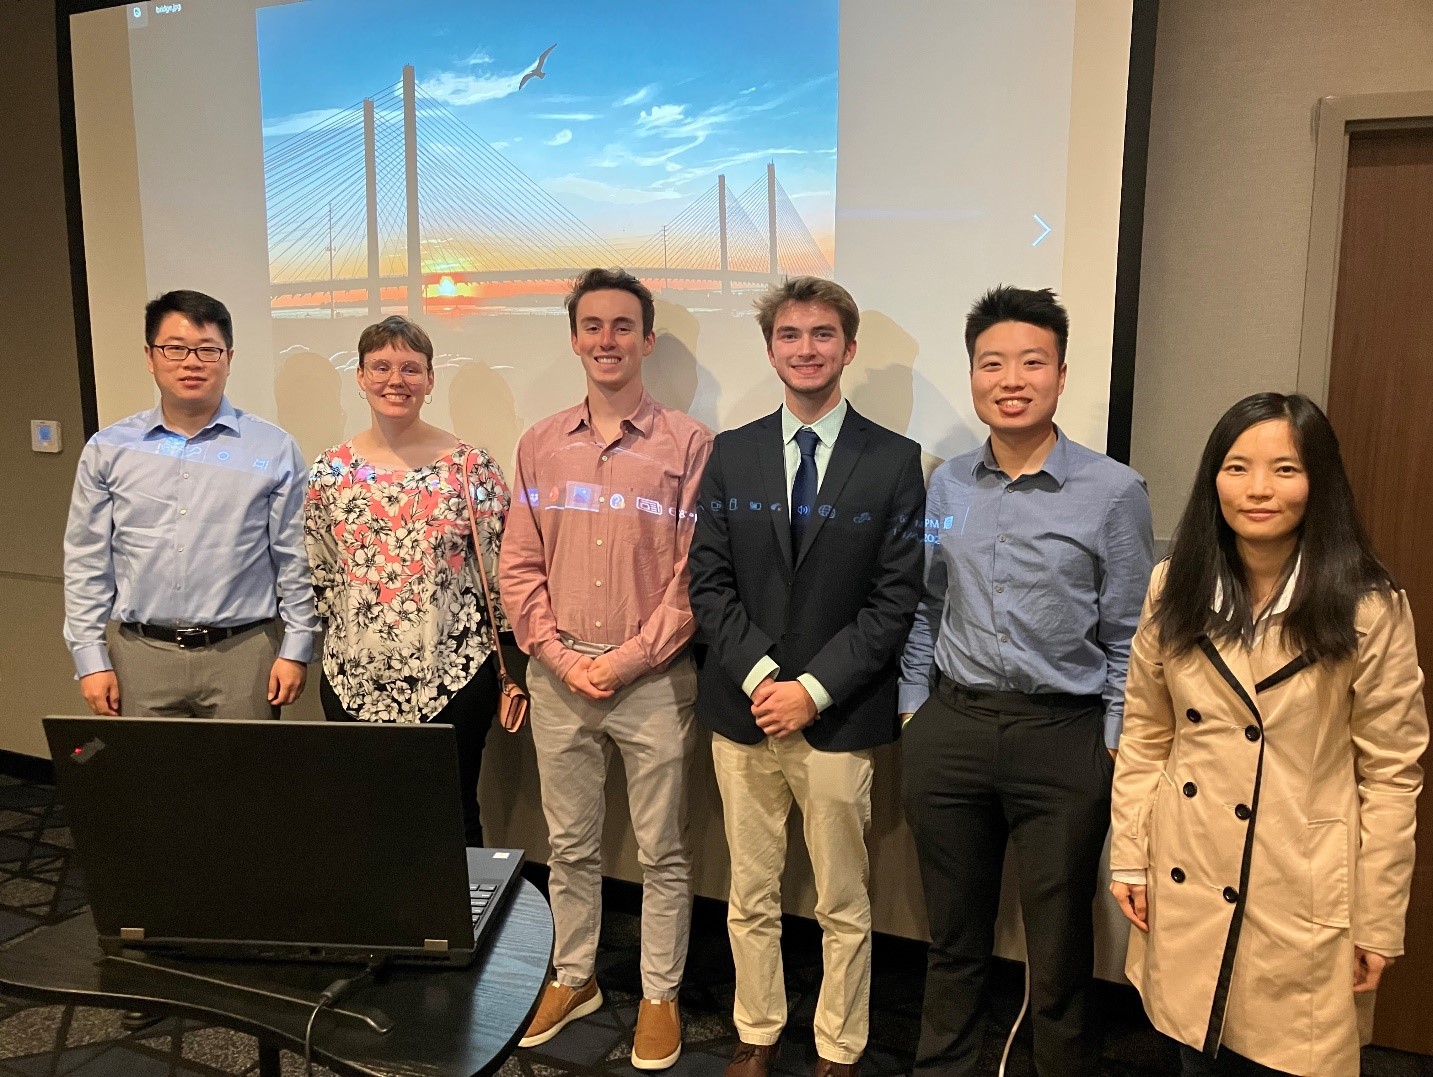 At the student section of ChaserCon (left to right): CISESS Scientist Guangyang Fang, Undergraduate Research Assistants Samantha Smith, Alex Friedman and Domenic Brooks, Graduate Student Alvin Cheung, and Scientist Daile Zhang.